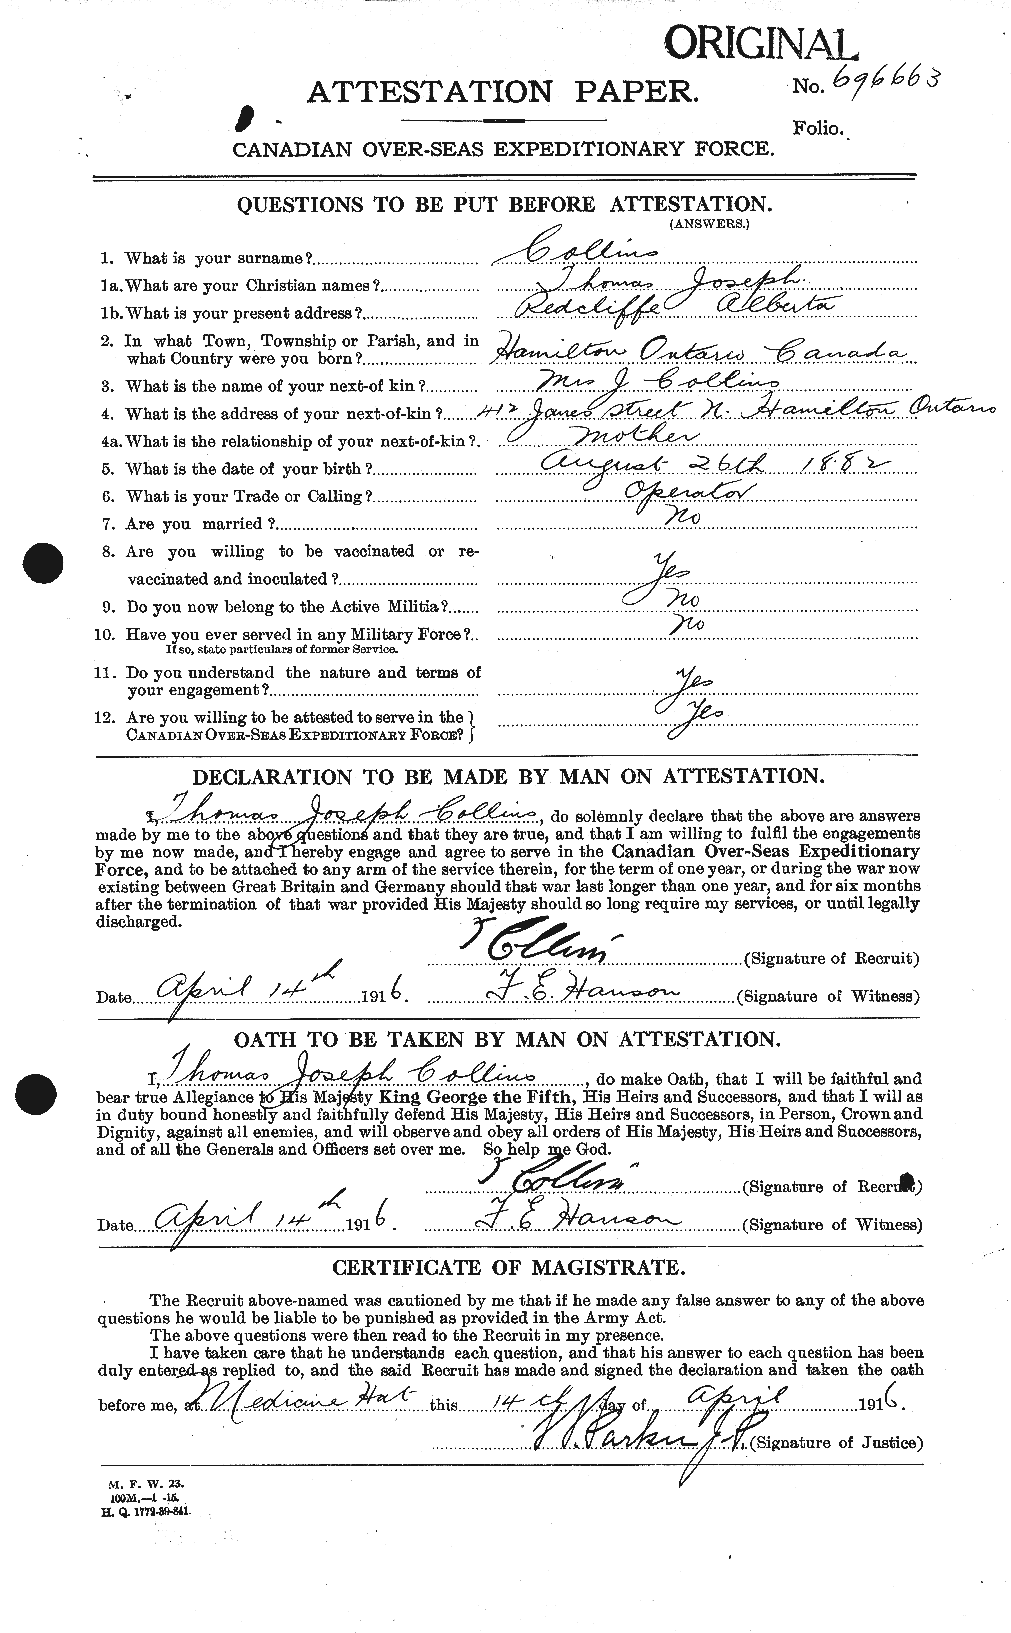 Personnel Records of the First World War - CEF 069123a